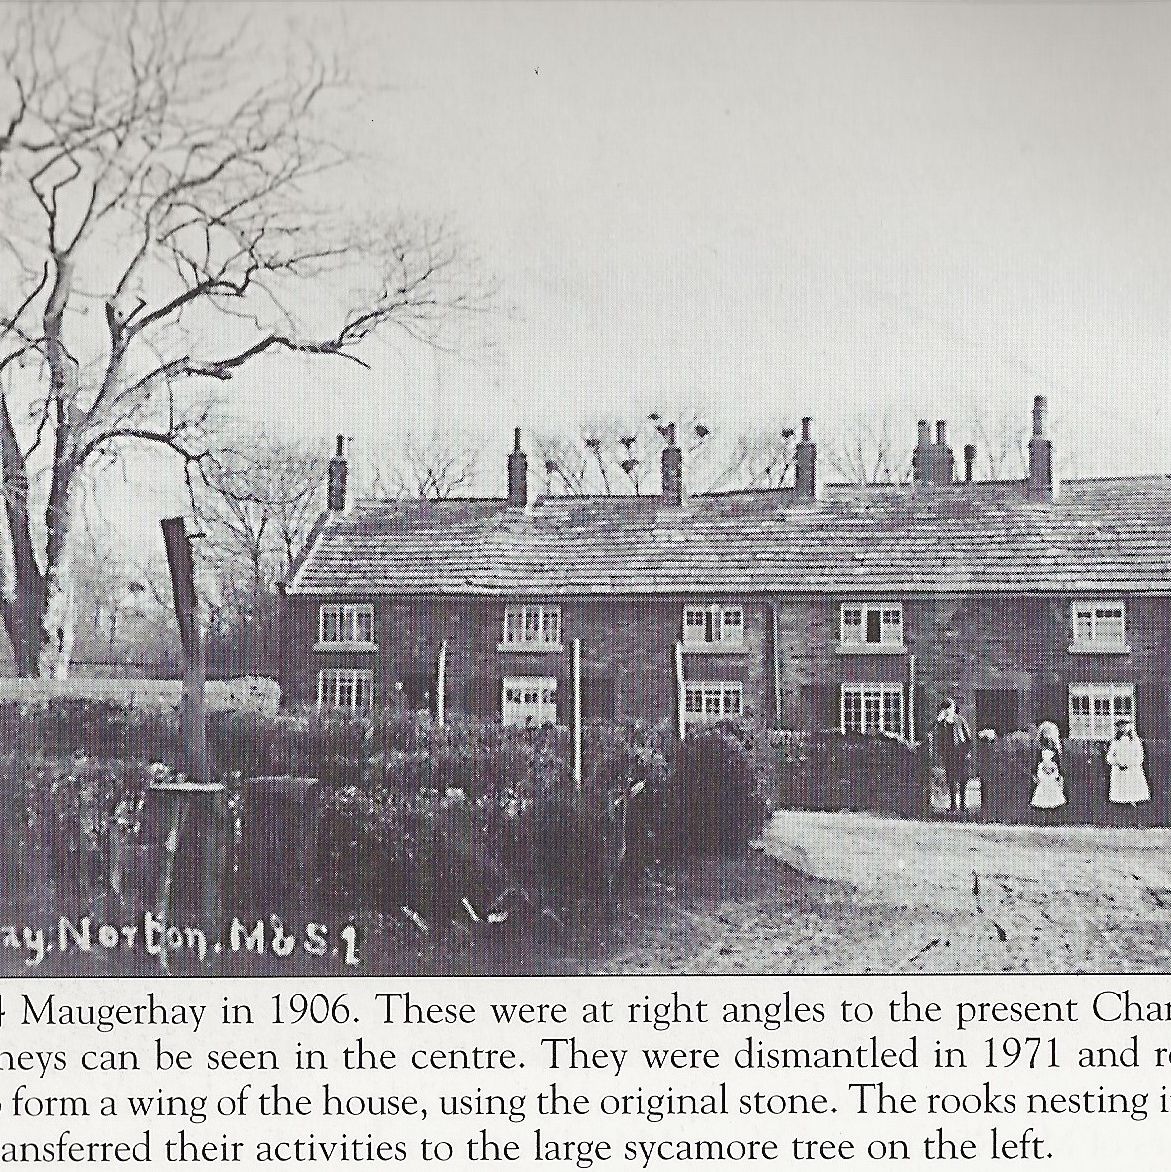 Cottages 1-4 Maugerhay 1906